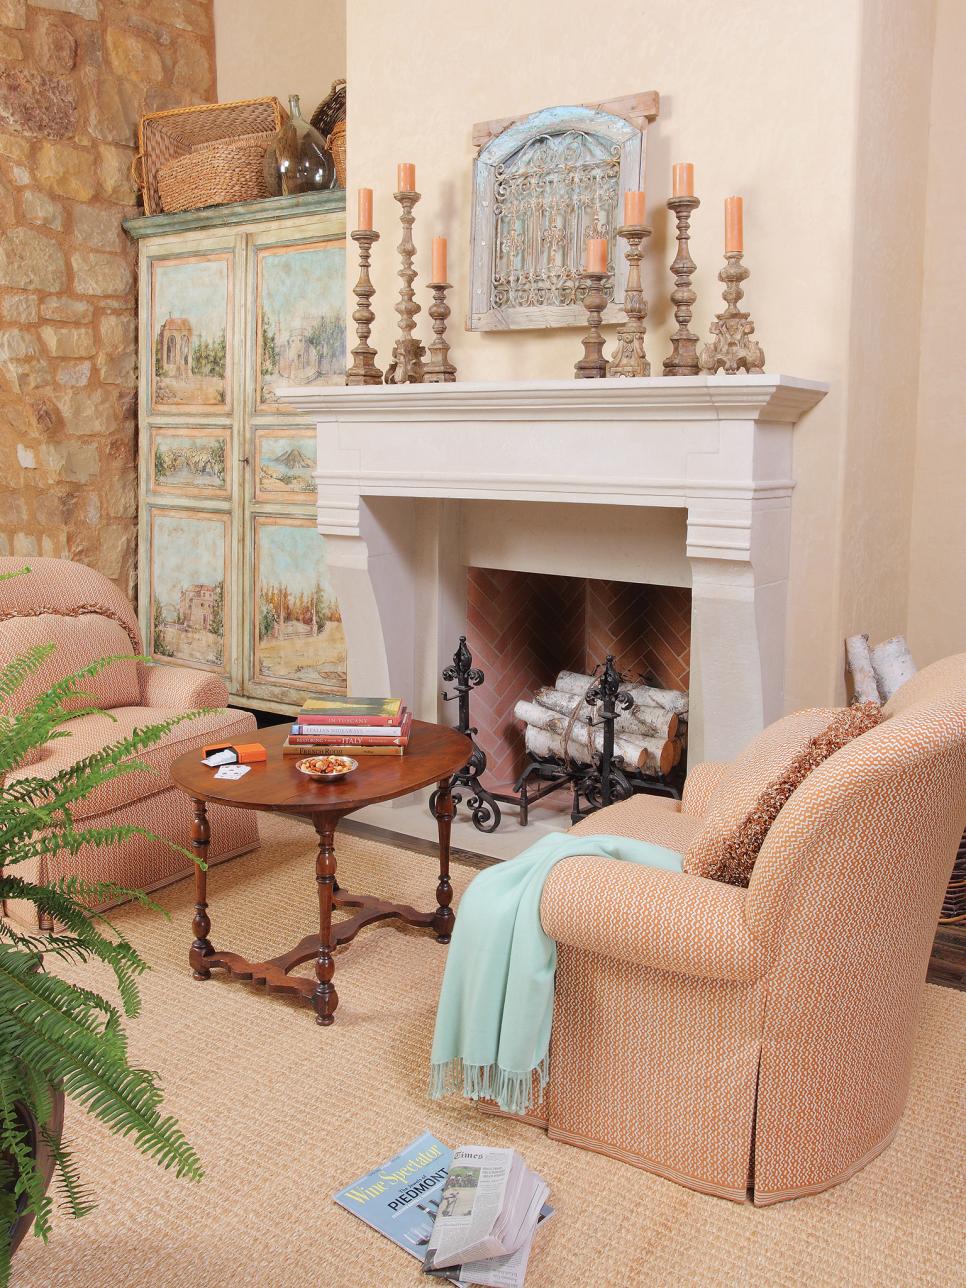 Transitional Neutral Living Room With White Mantel and Hand Painted Cabinet